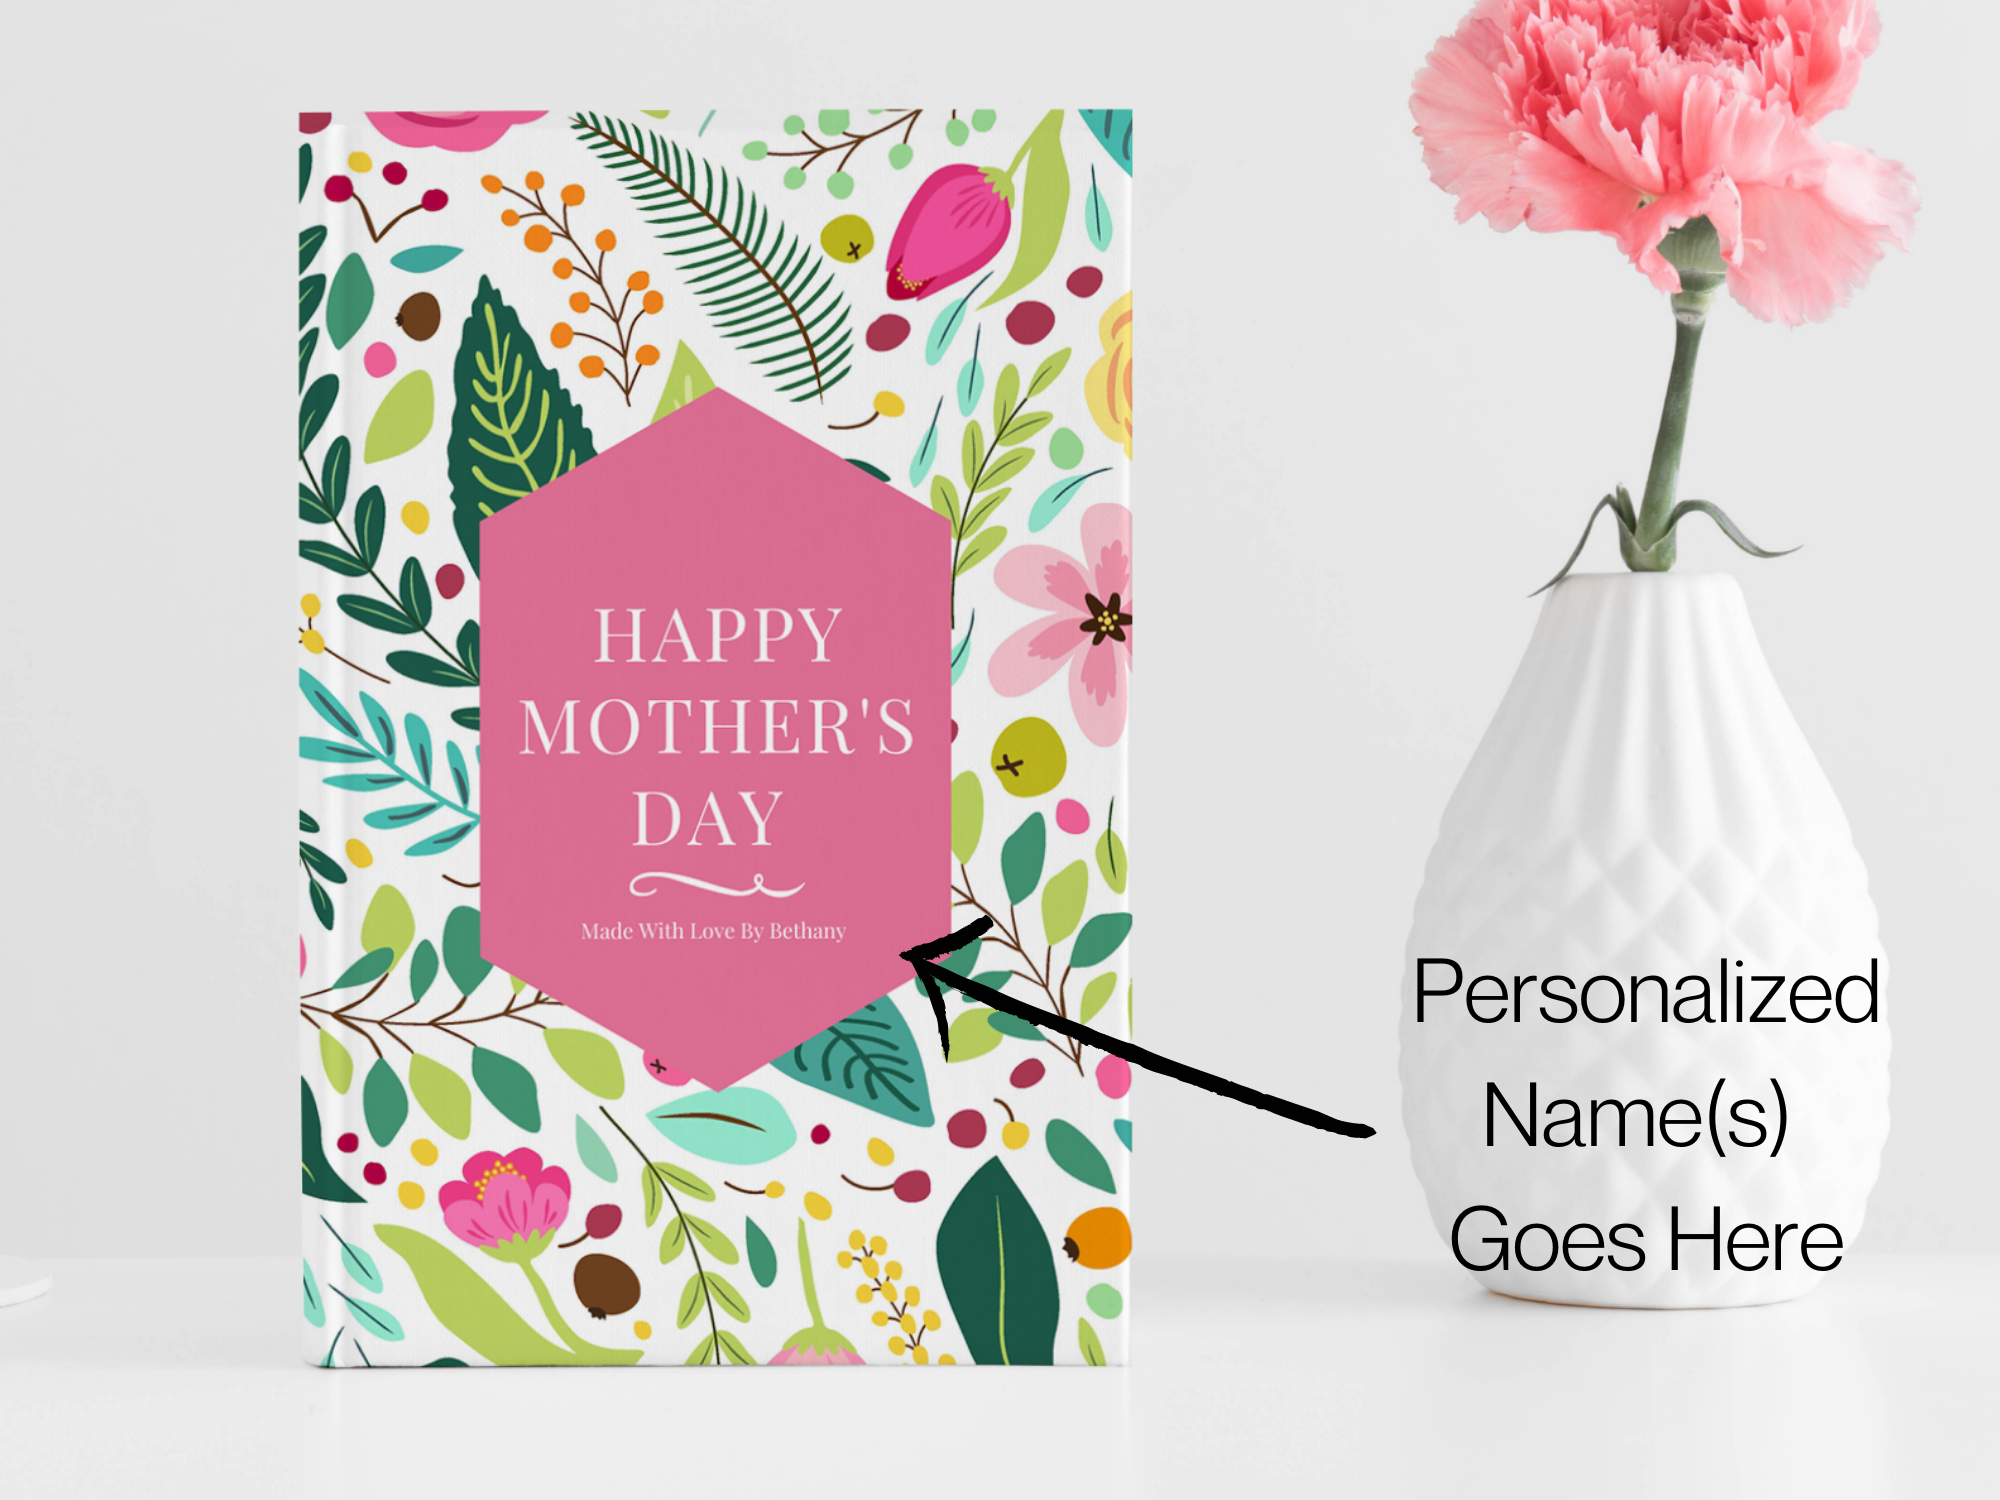 11 cheap & easy gifts for teens to give to mom on Mother's Day - LIFE,  CREATIVELY ORGANIZED